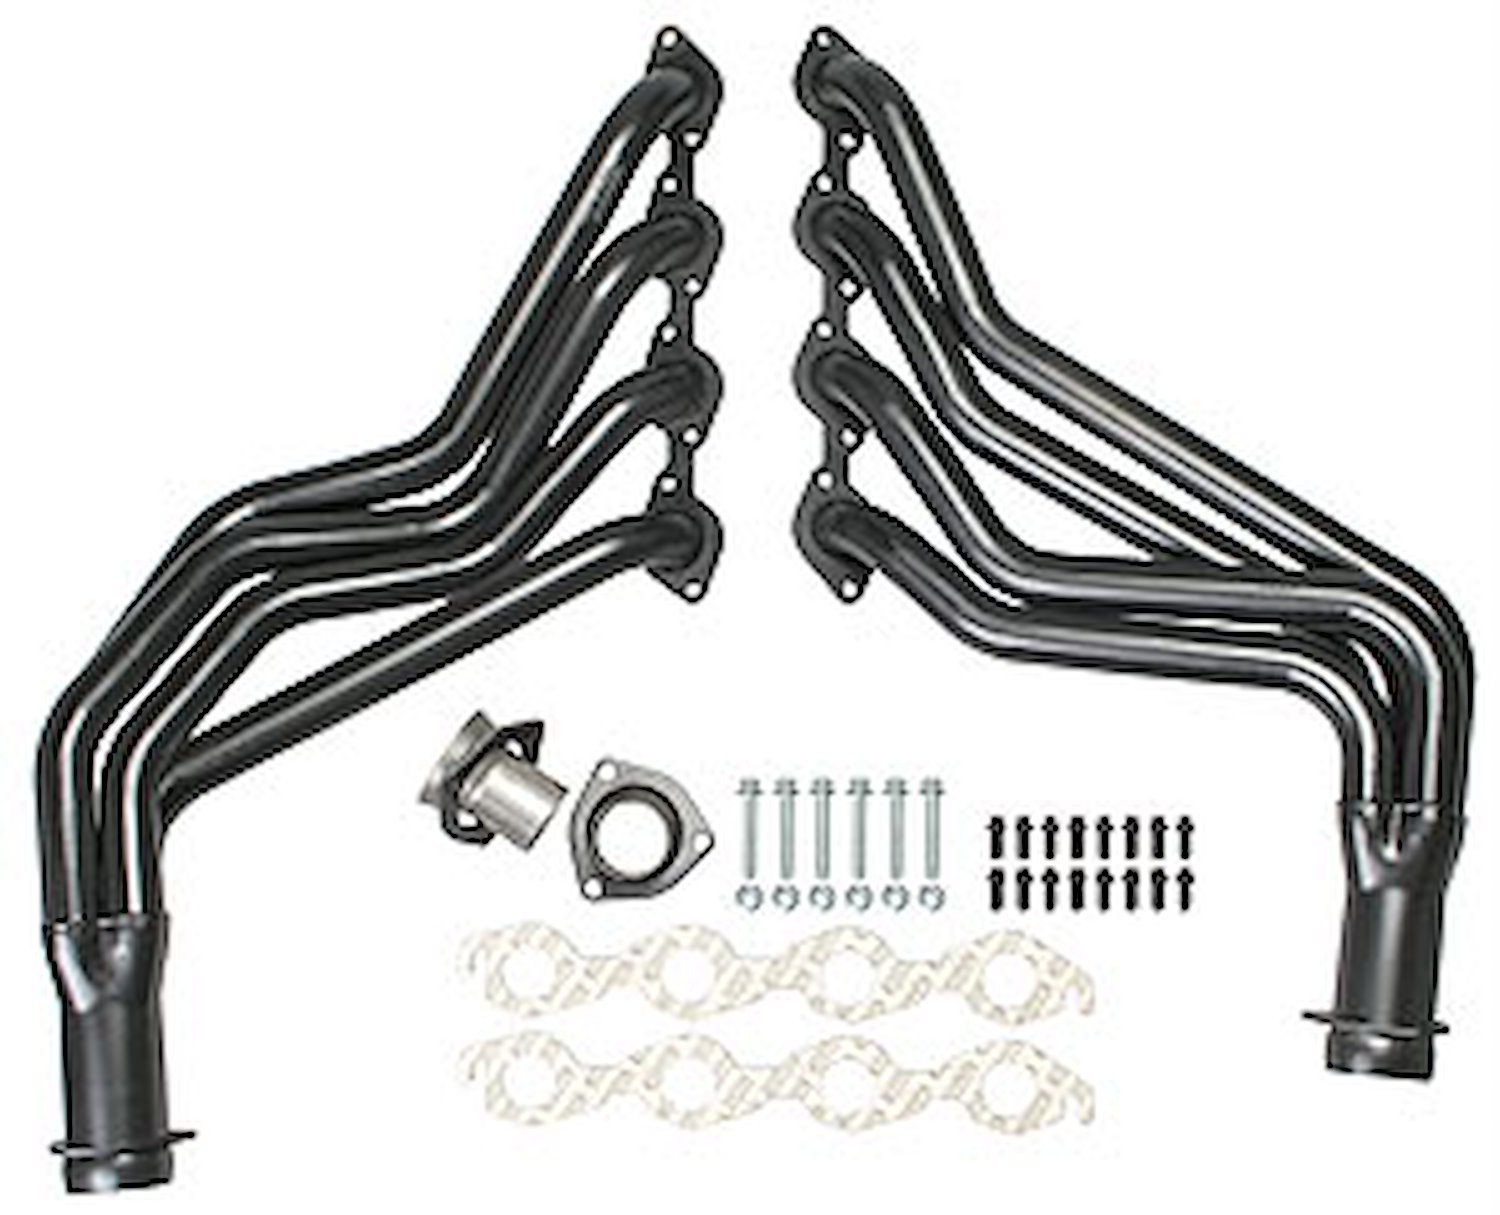 Standard Duty Uncoated Full Length Headers for 1968-91 Chevy/GMC Pickup, Blazer, Jimmy, Suburban